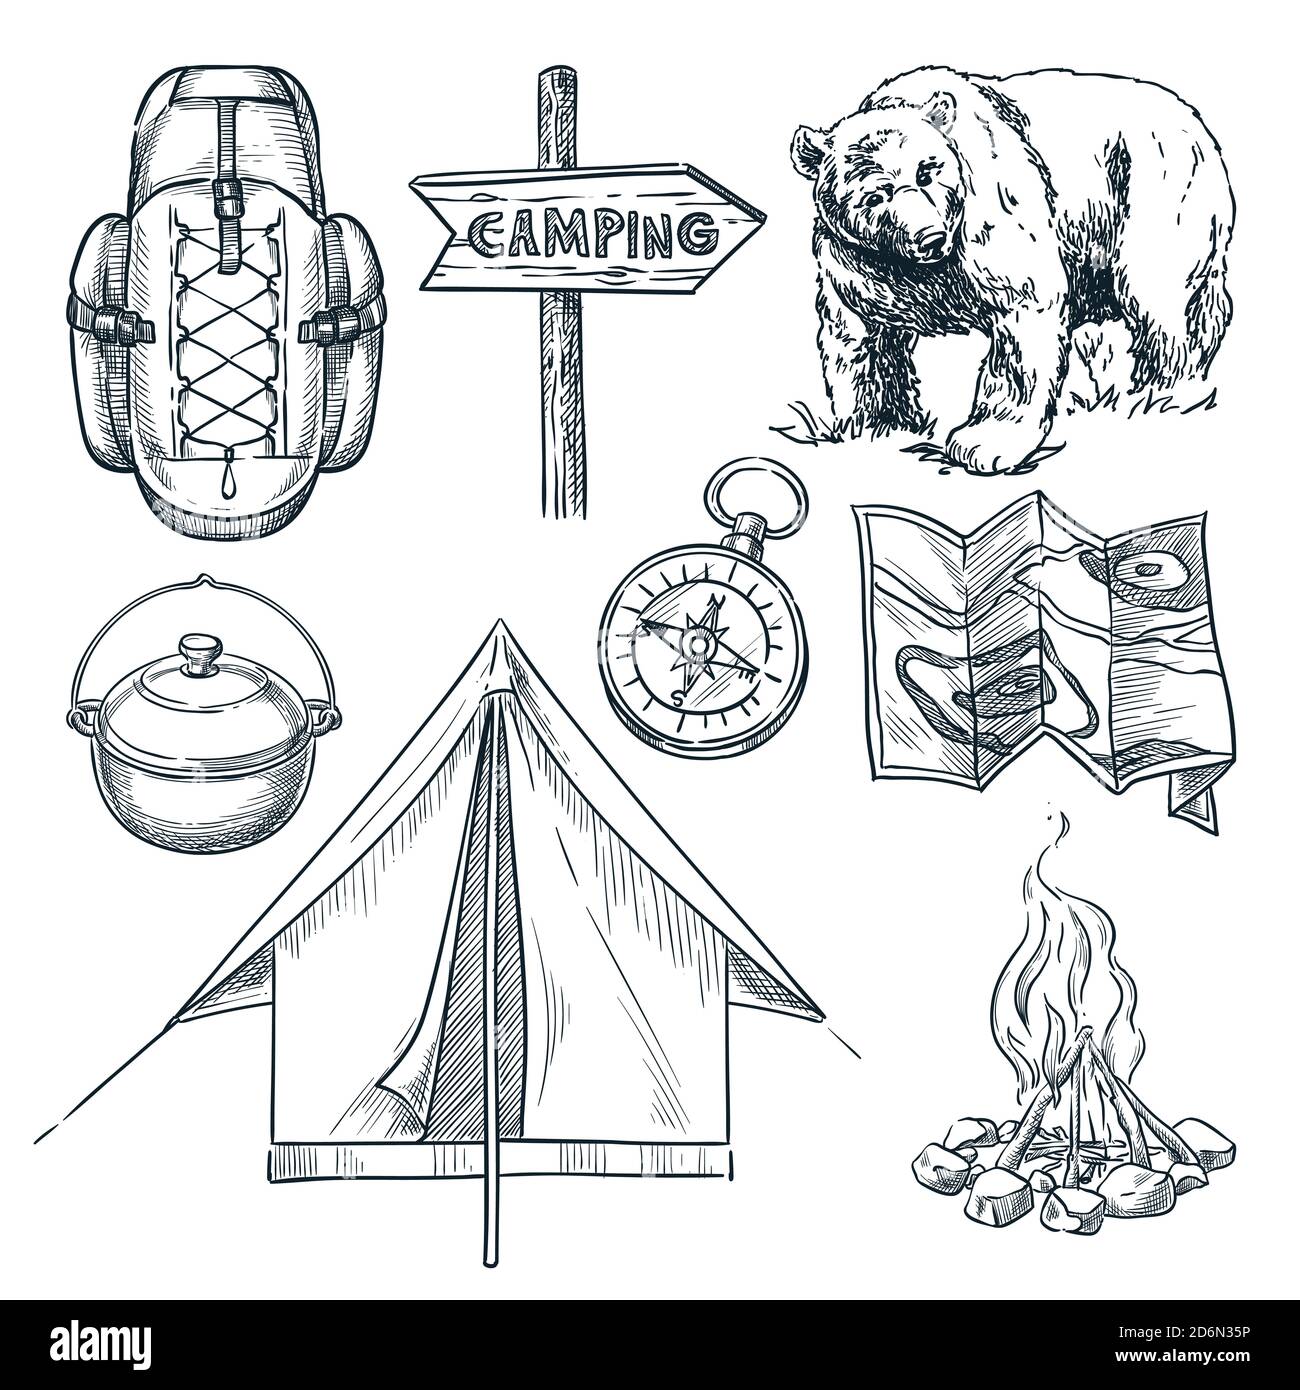 Camping vector sketch illustration. Camp stuff design elements isolated on white background. Stock Vector